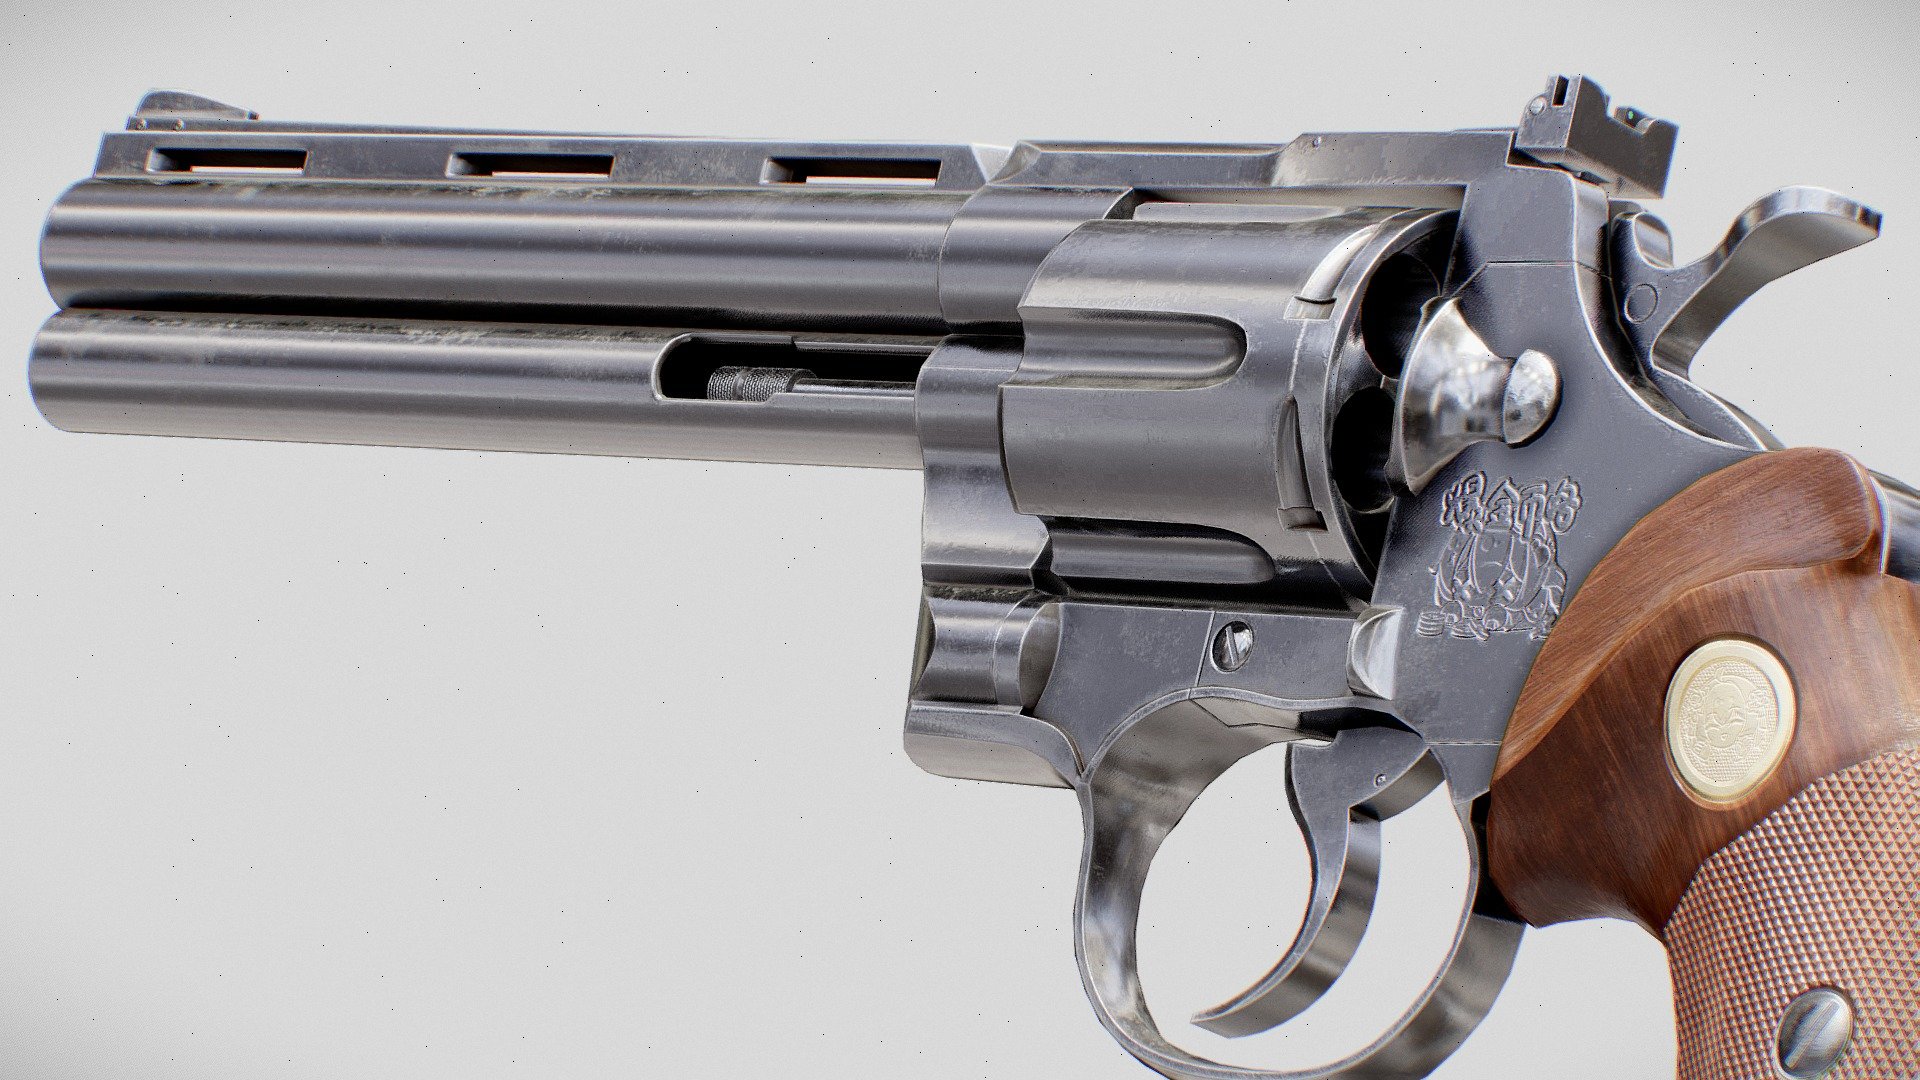 Hi, this is my first gameready model practice  for modeling learning




Modeling in Blender

Baking in Marmoset Toolbag

Texturing in Substance Painter

Free to download and I hope you can give me some suggestions that will help me modeling better - GameReady: Colt Python Revolver - Download Free 3D model by HYQQM 3d model